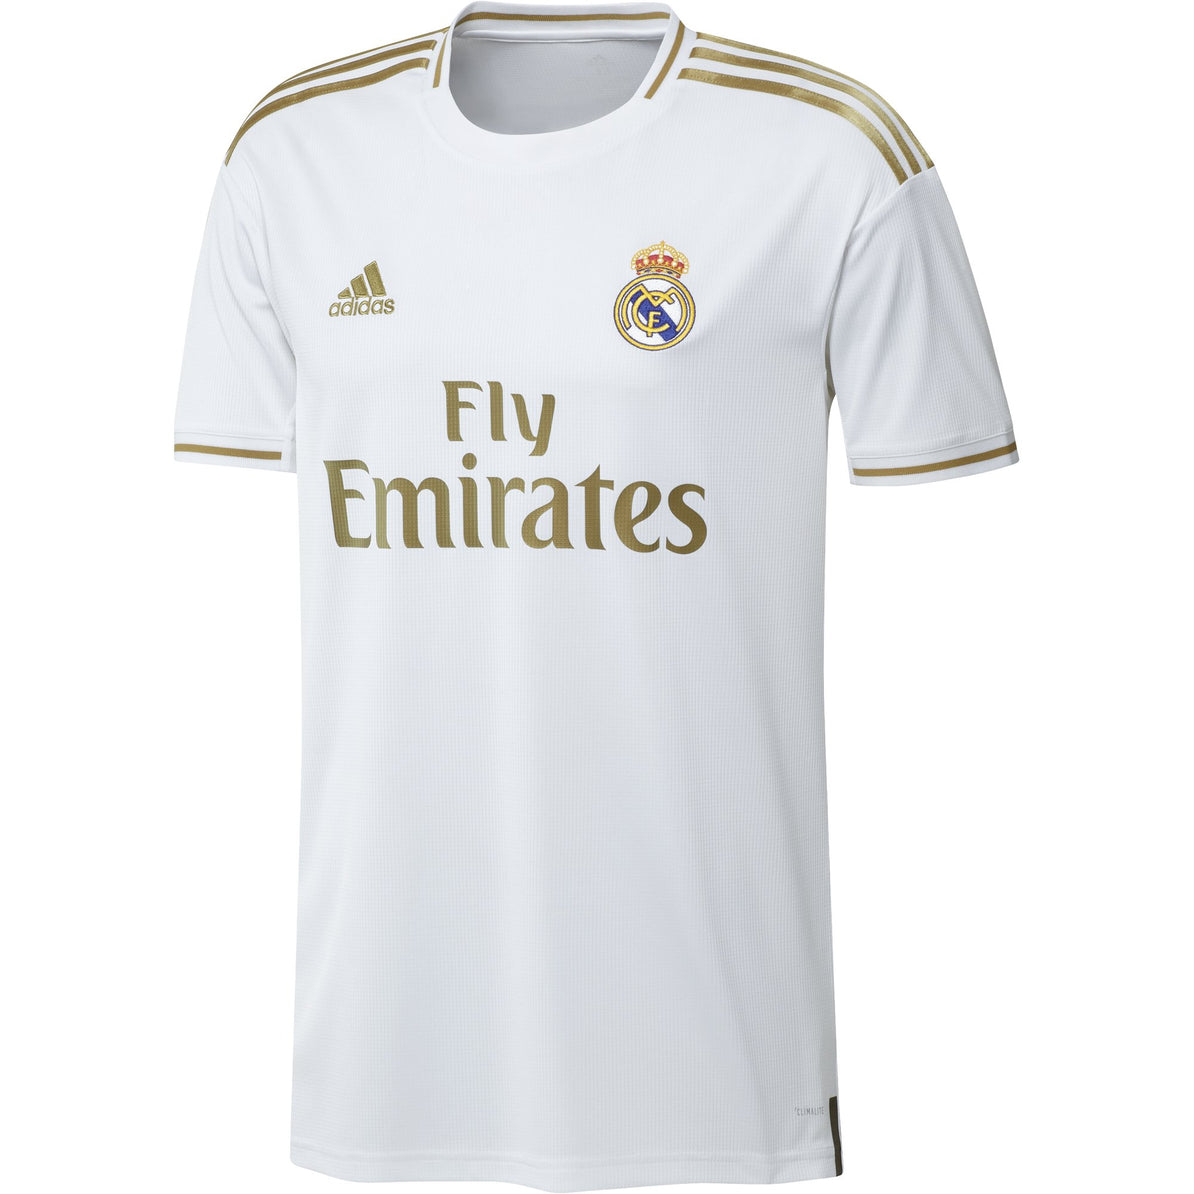 fly emirates jersey real madrid